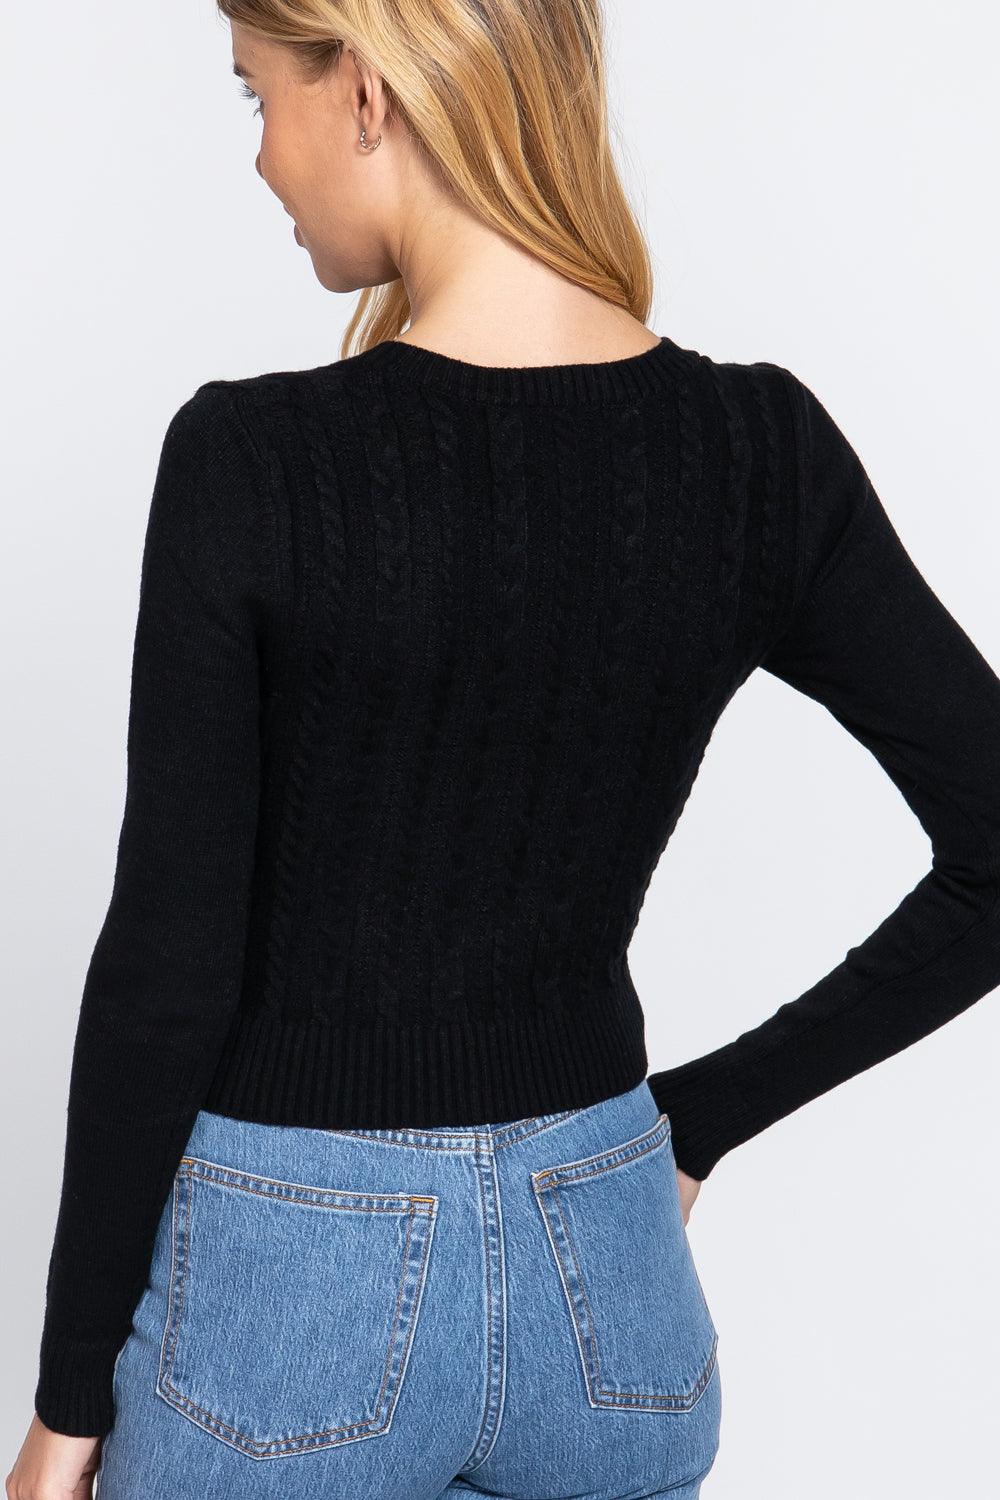 Long Sleeve V-neck Cable Sweater Naughty Smile Fashion